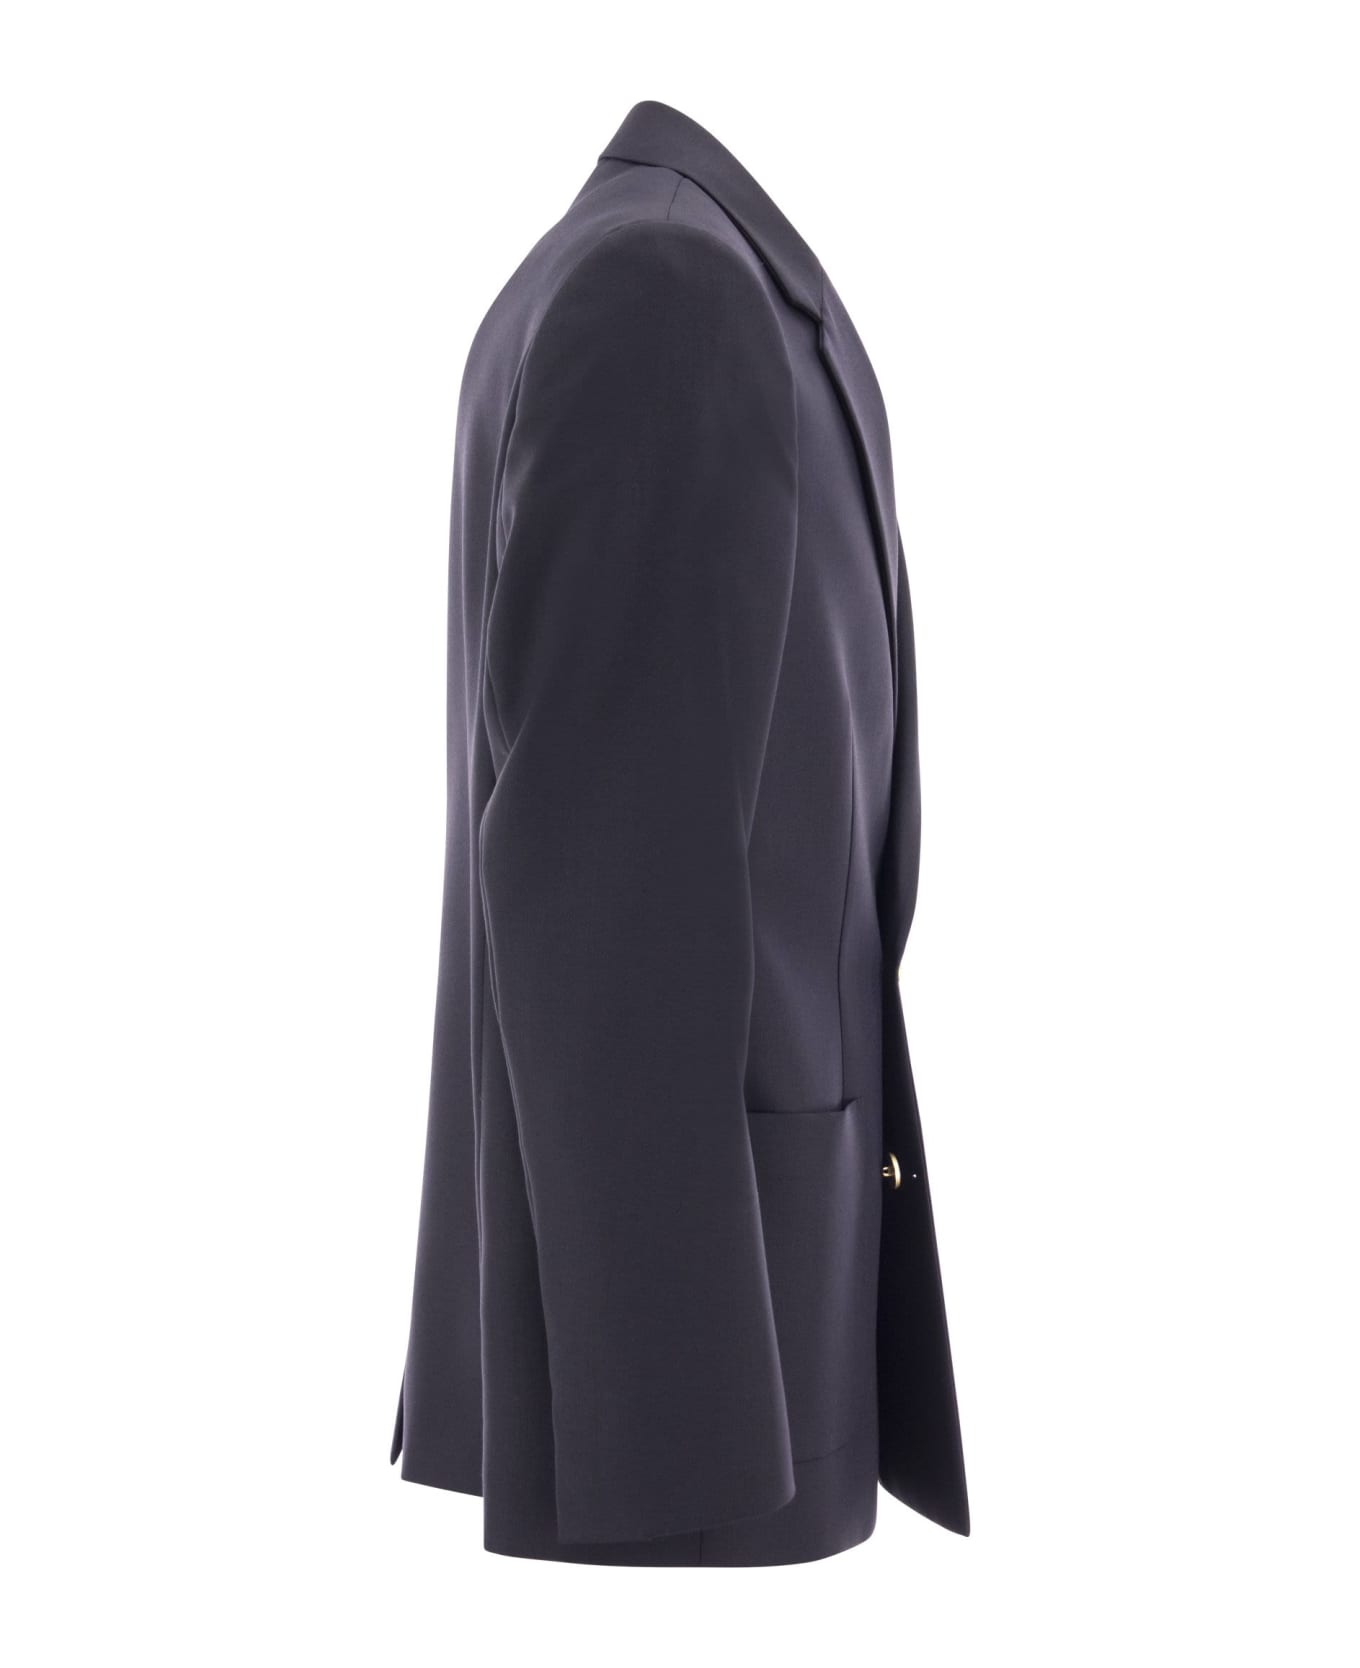 PT01 Double-breasted Jacket In Wool Blend - Navy